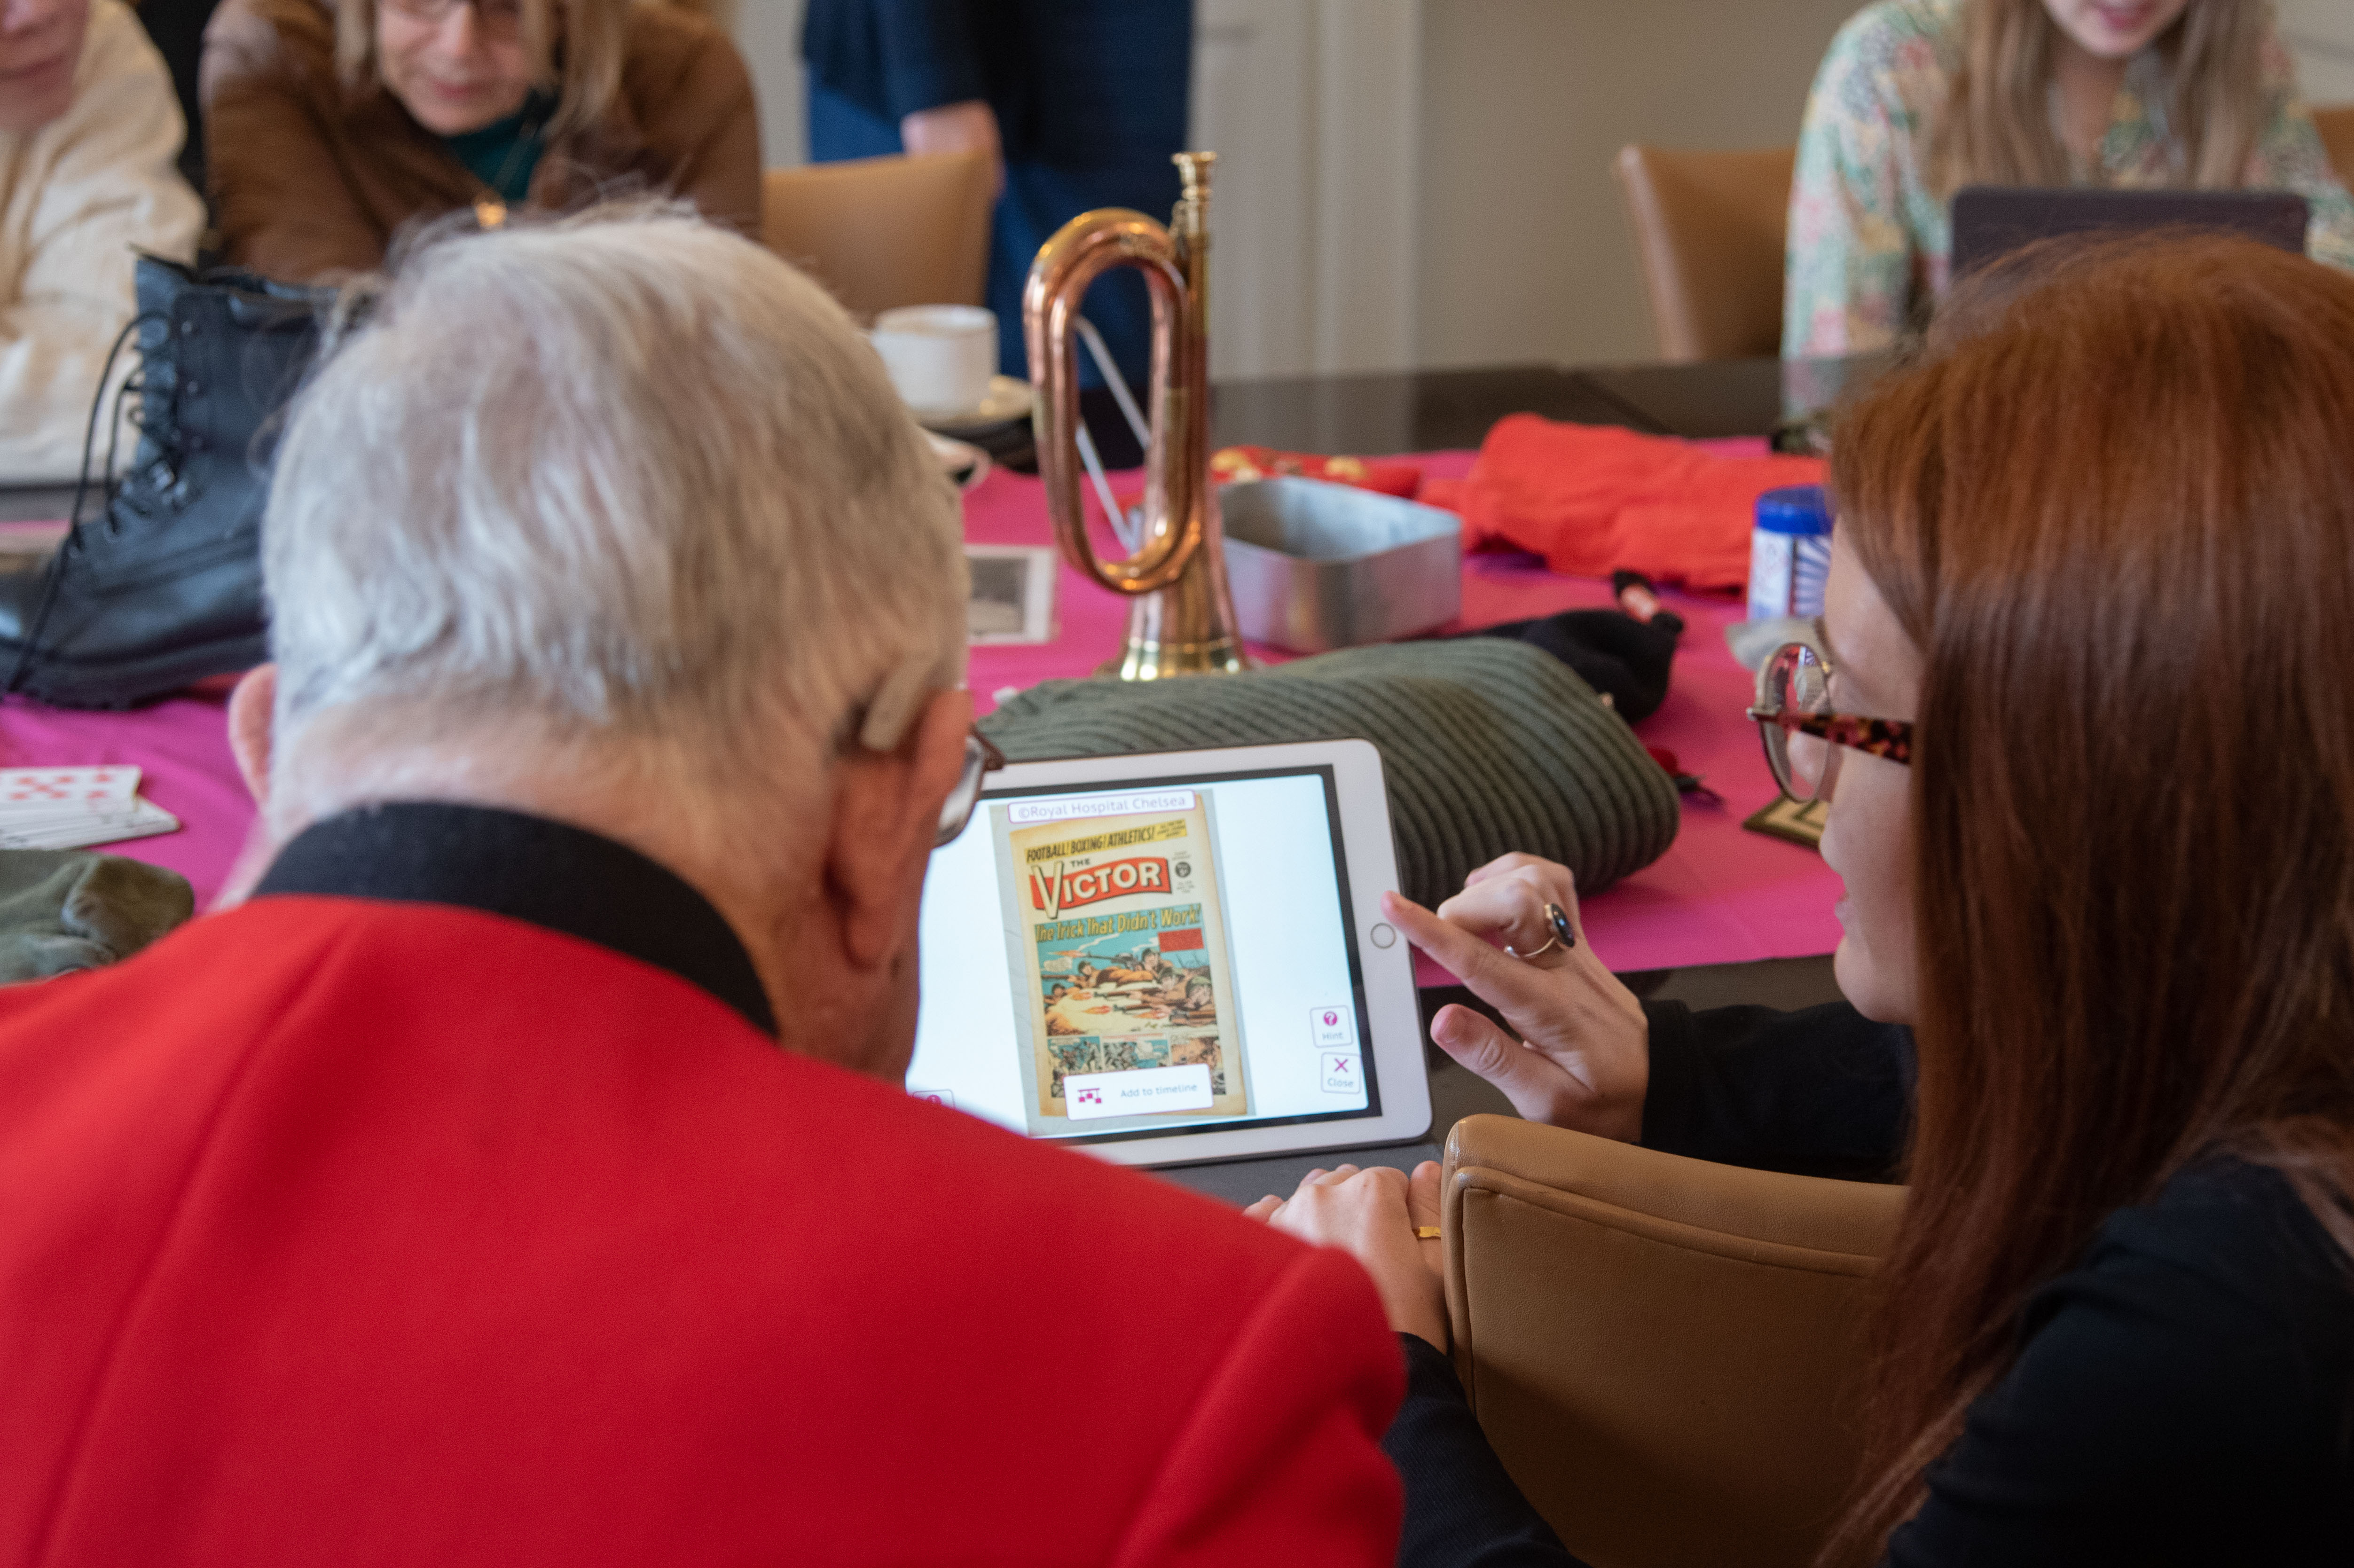 Chelsea Pensioner in scarlets and woman looking at an iPad